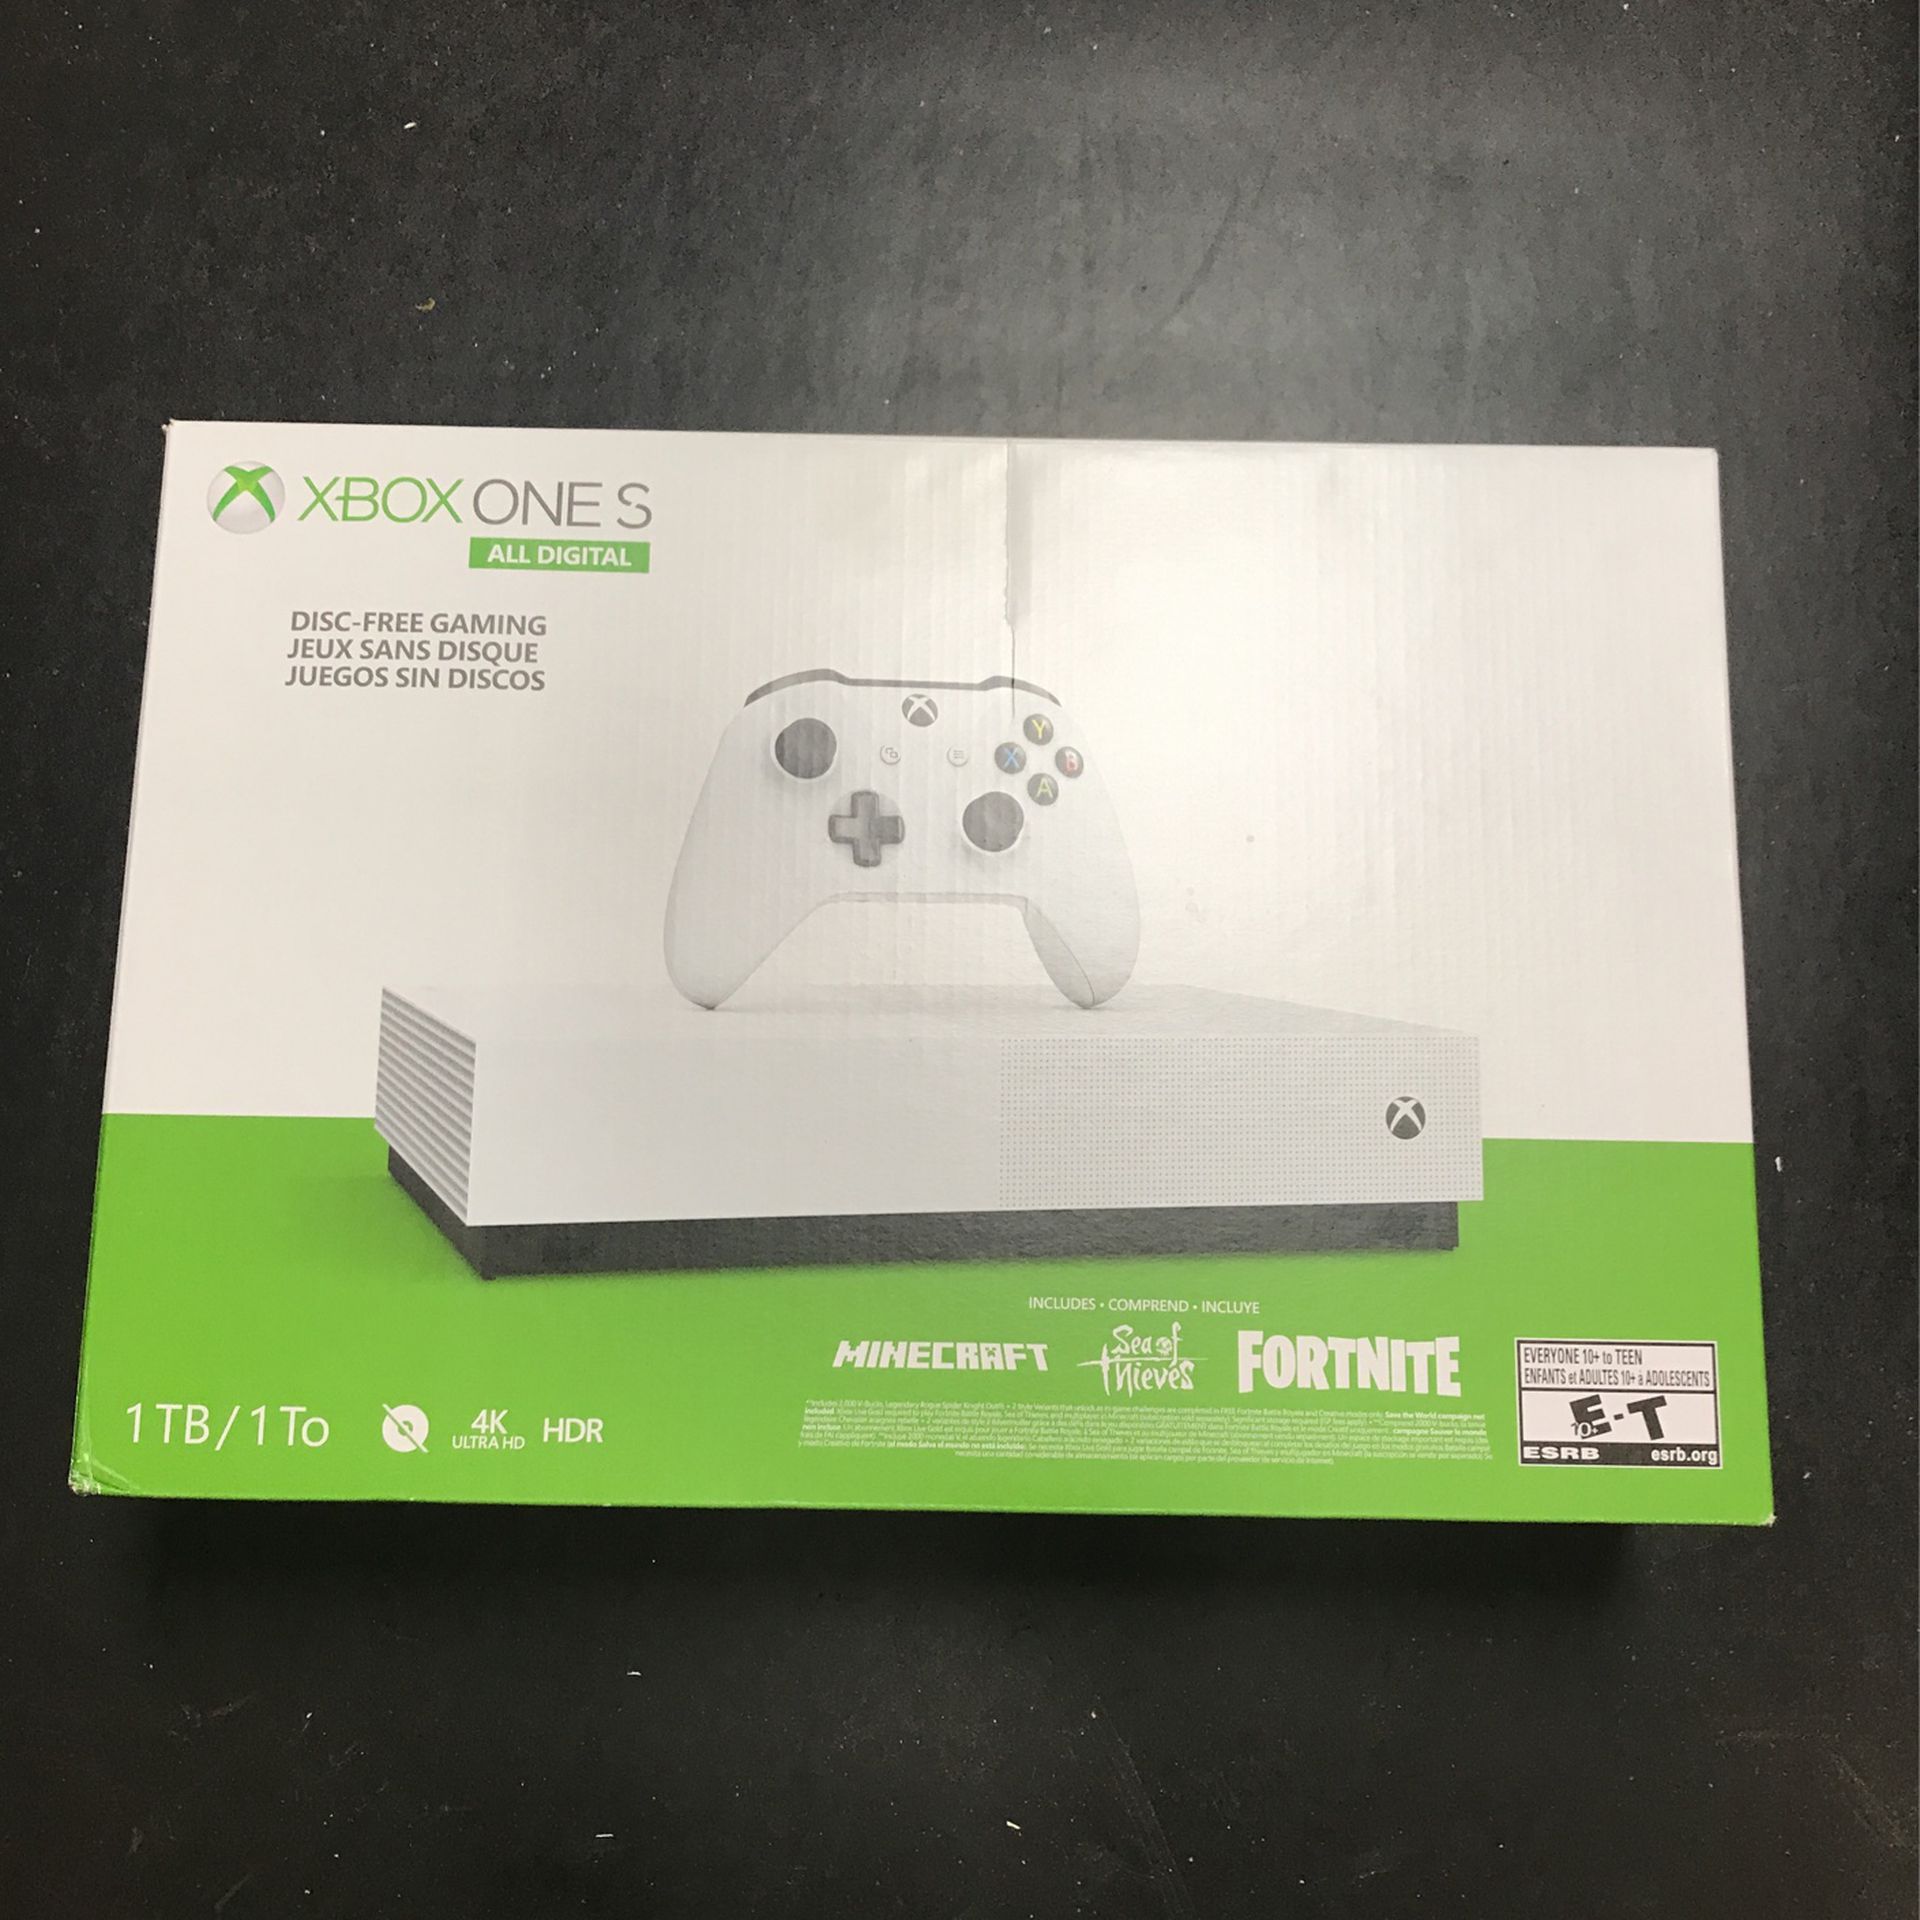 Microsoft 1681 XBOX One S Digital Edition Home Game Console Egg